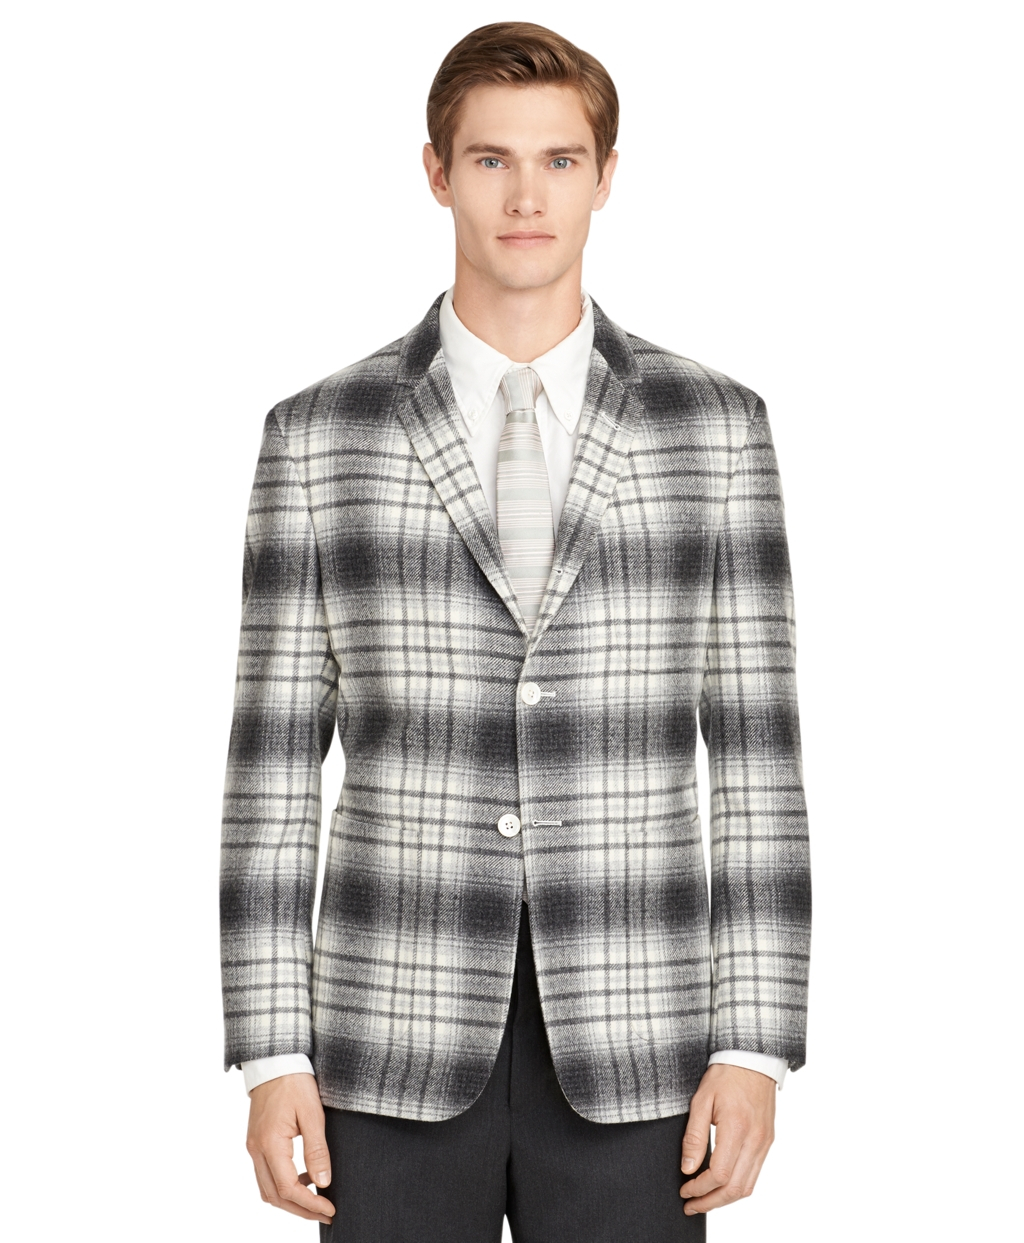 Lyst - Brooks Brothers Grey Plaid Sport Jacket in Gray for Men